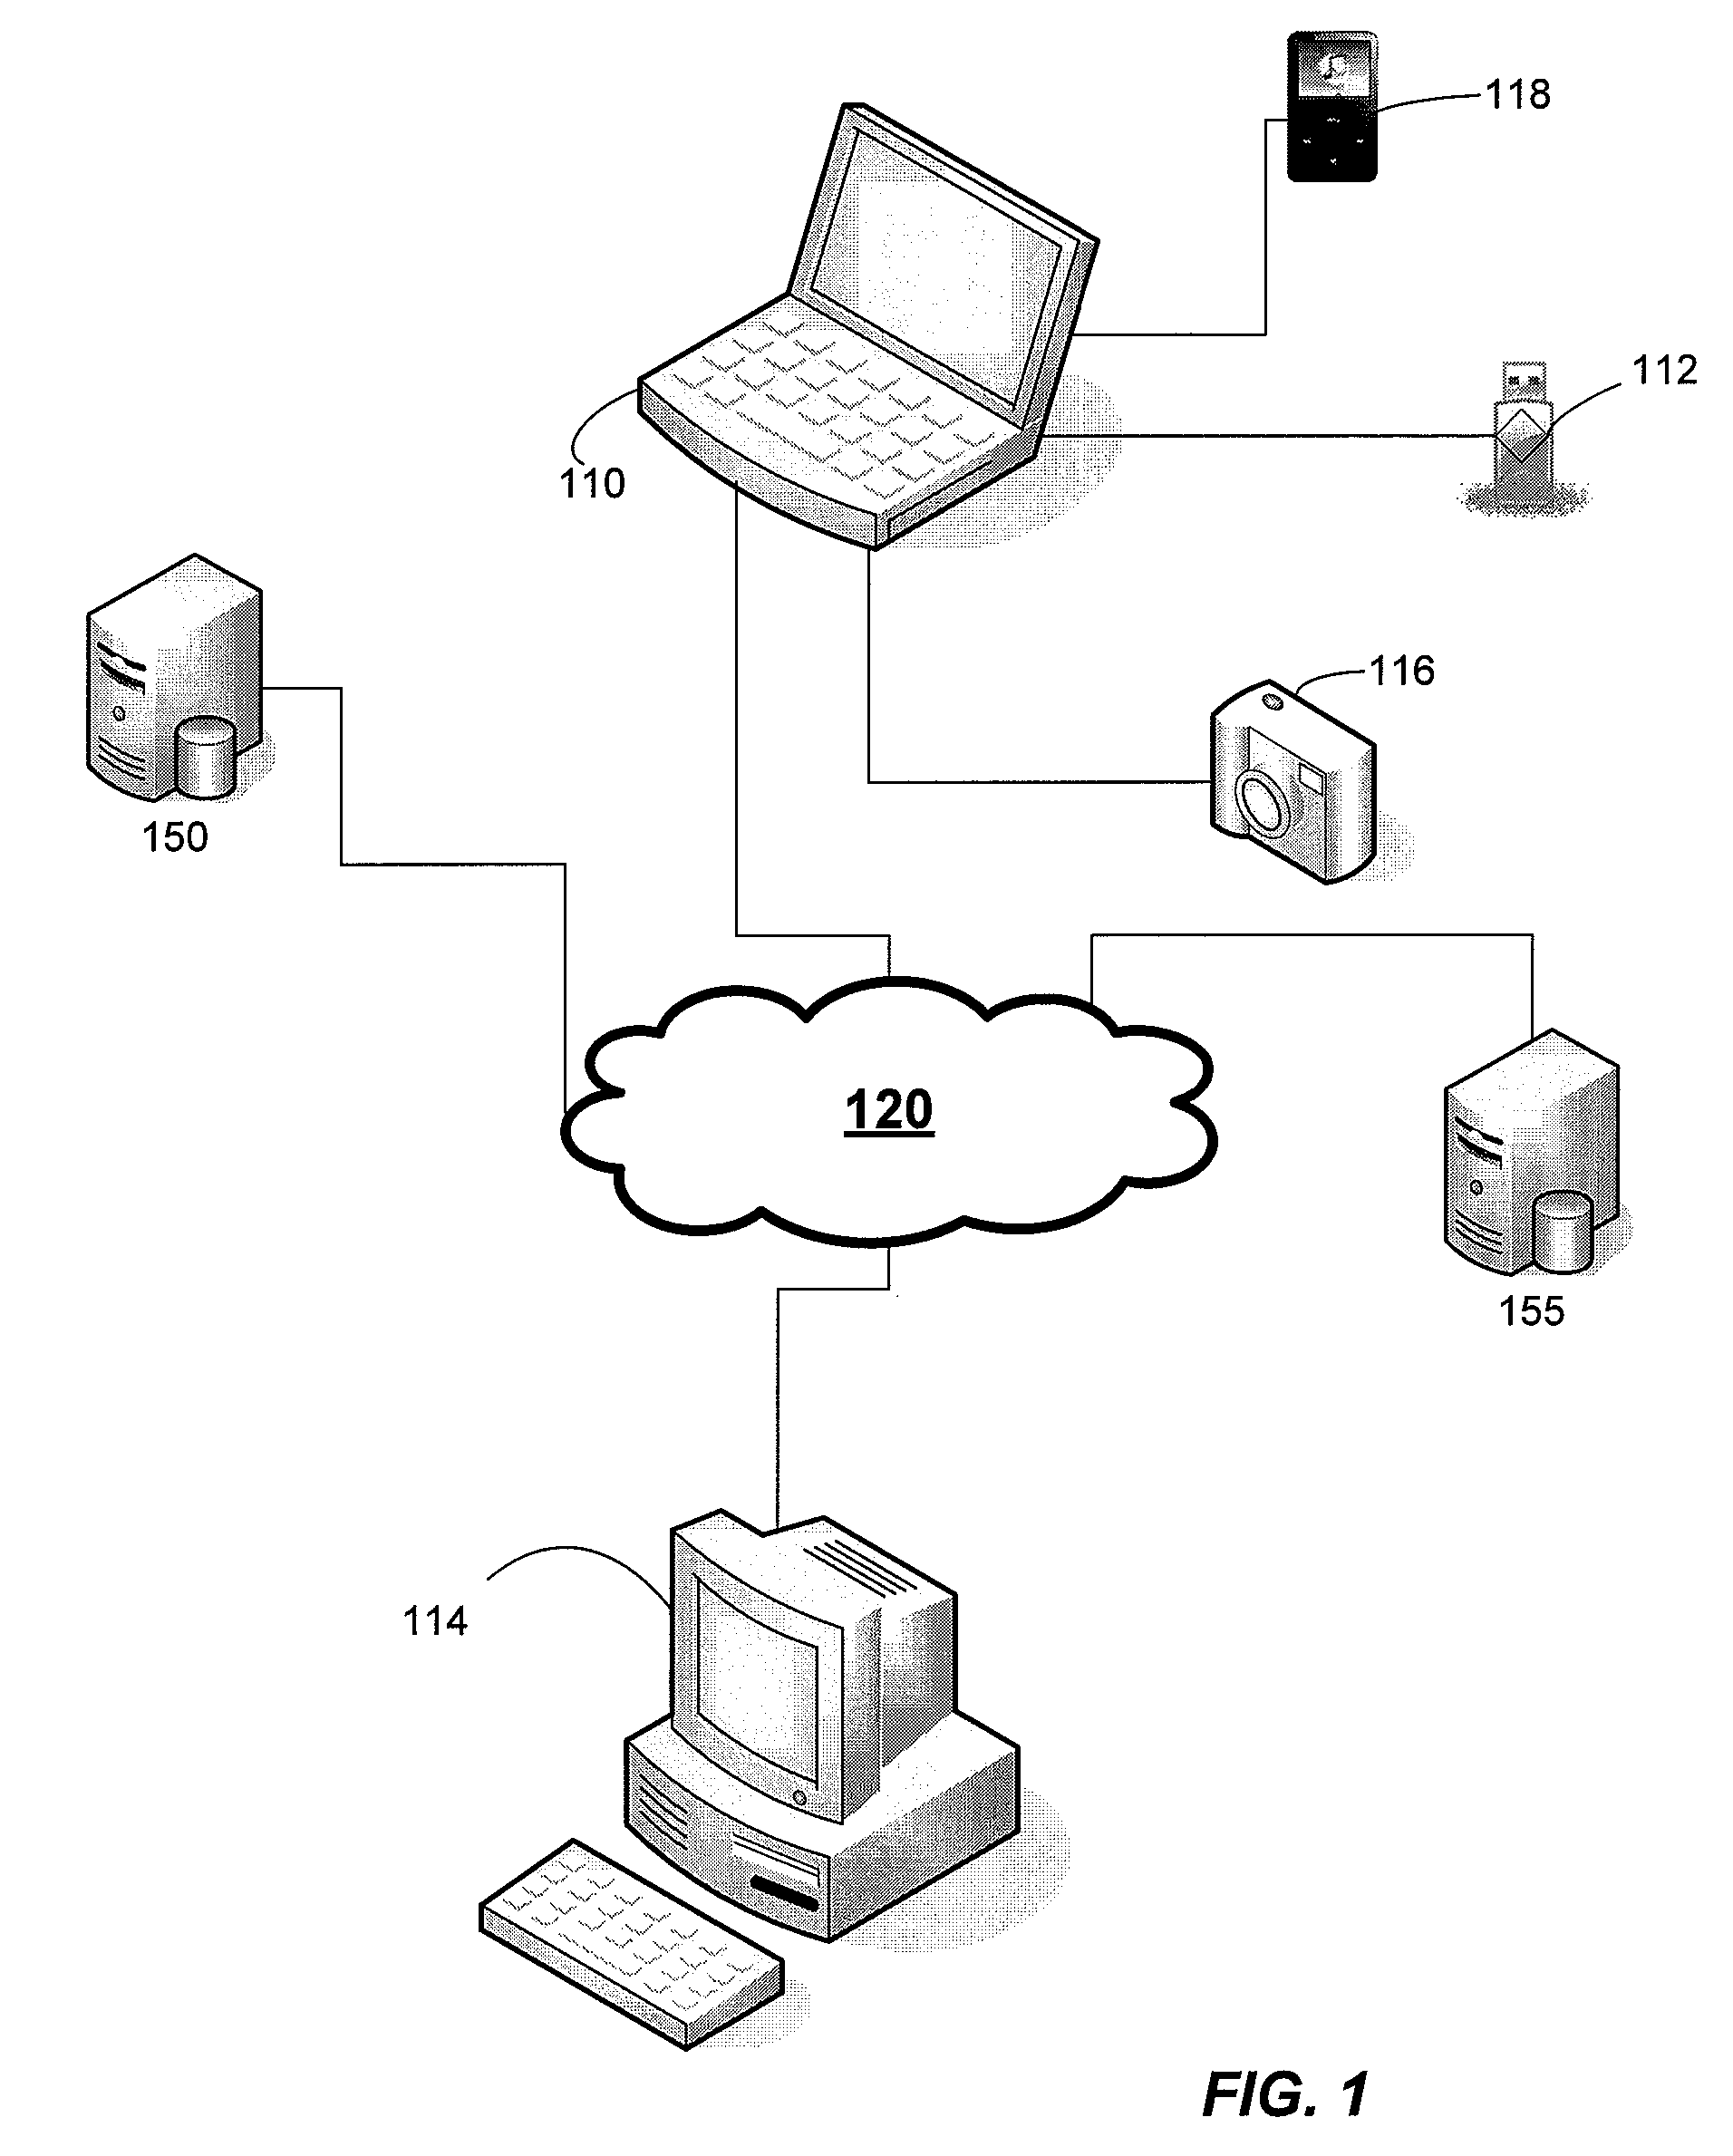 Systems for finding a lost transient storage device